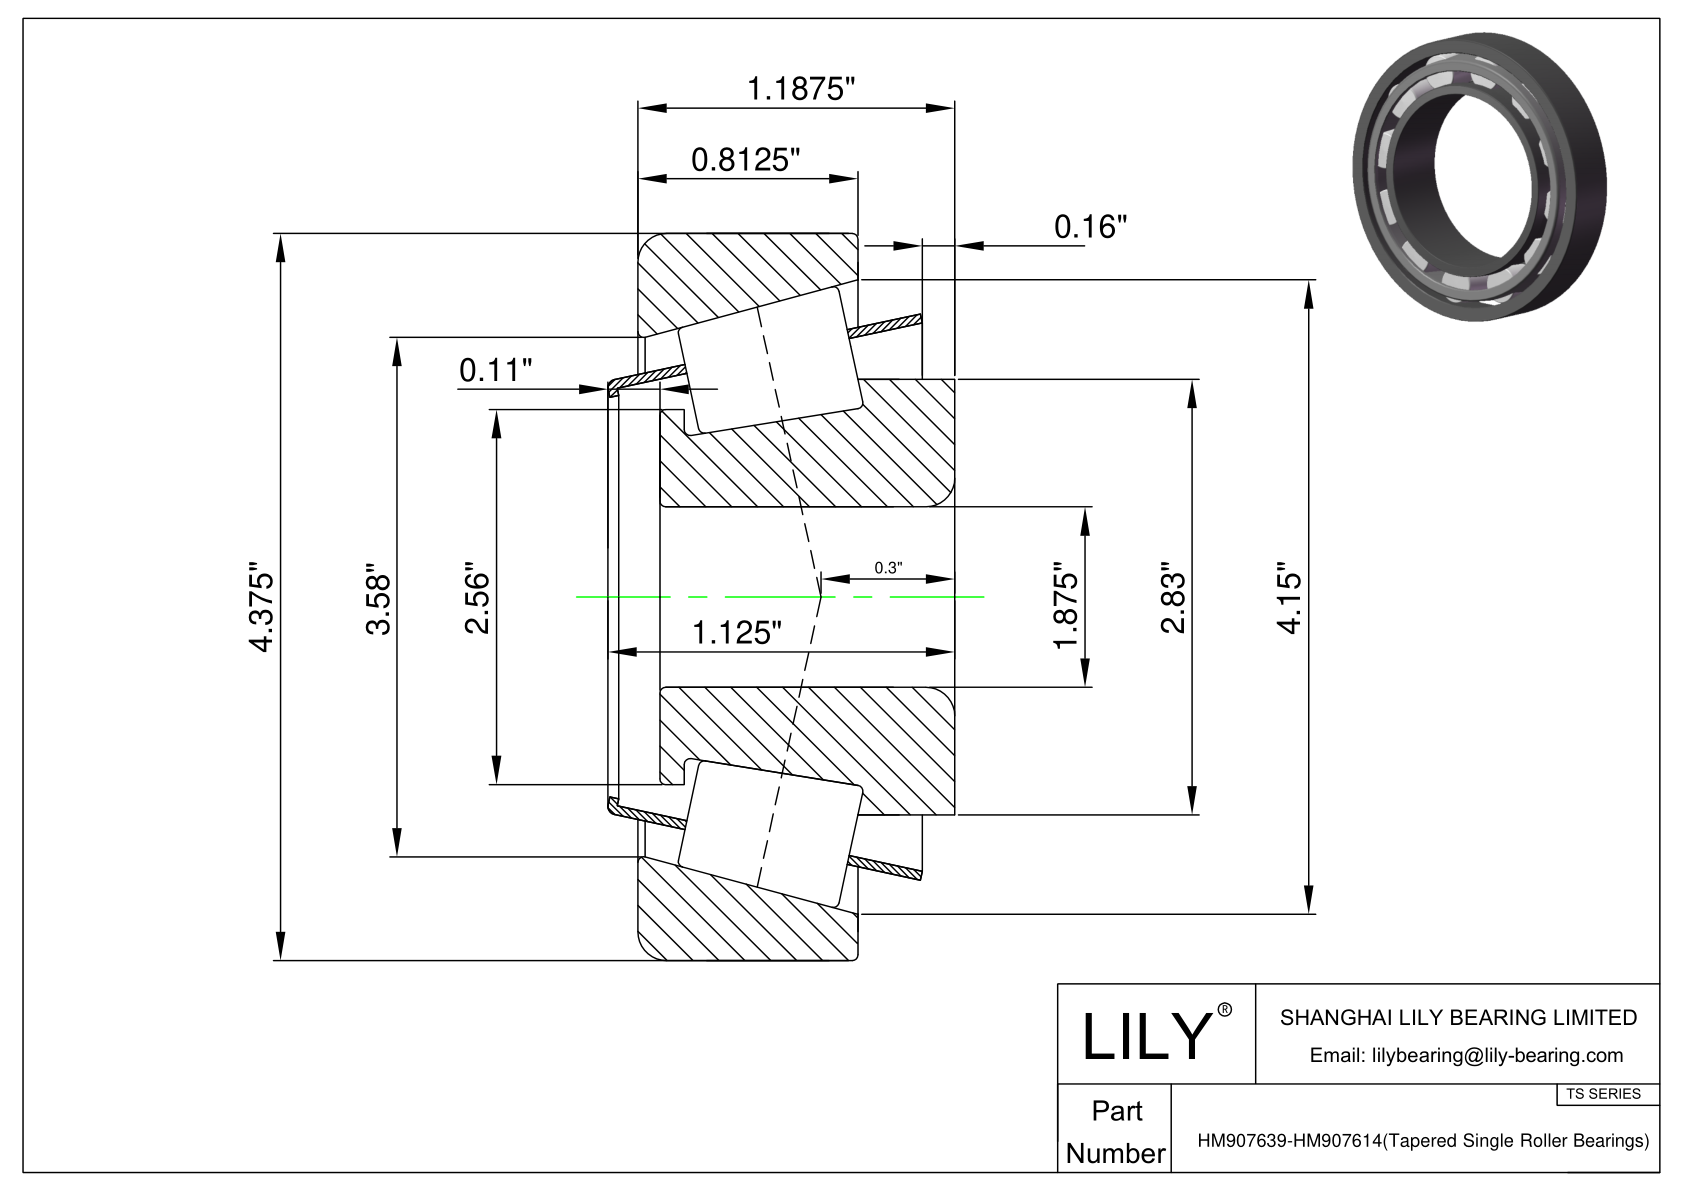 HM907639-HM907614 TS (Tapered Single Roller Bearings) (Imperial) cad drawing